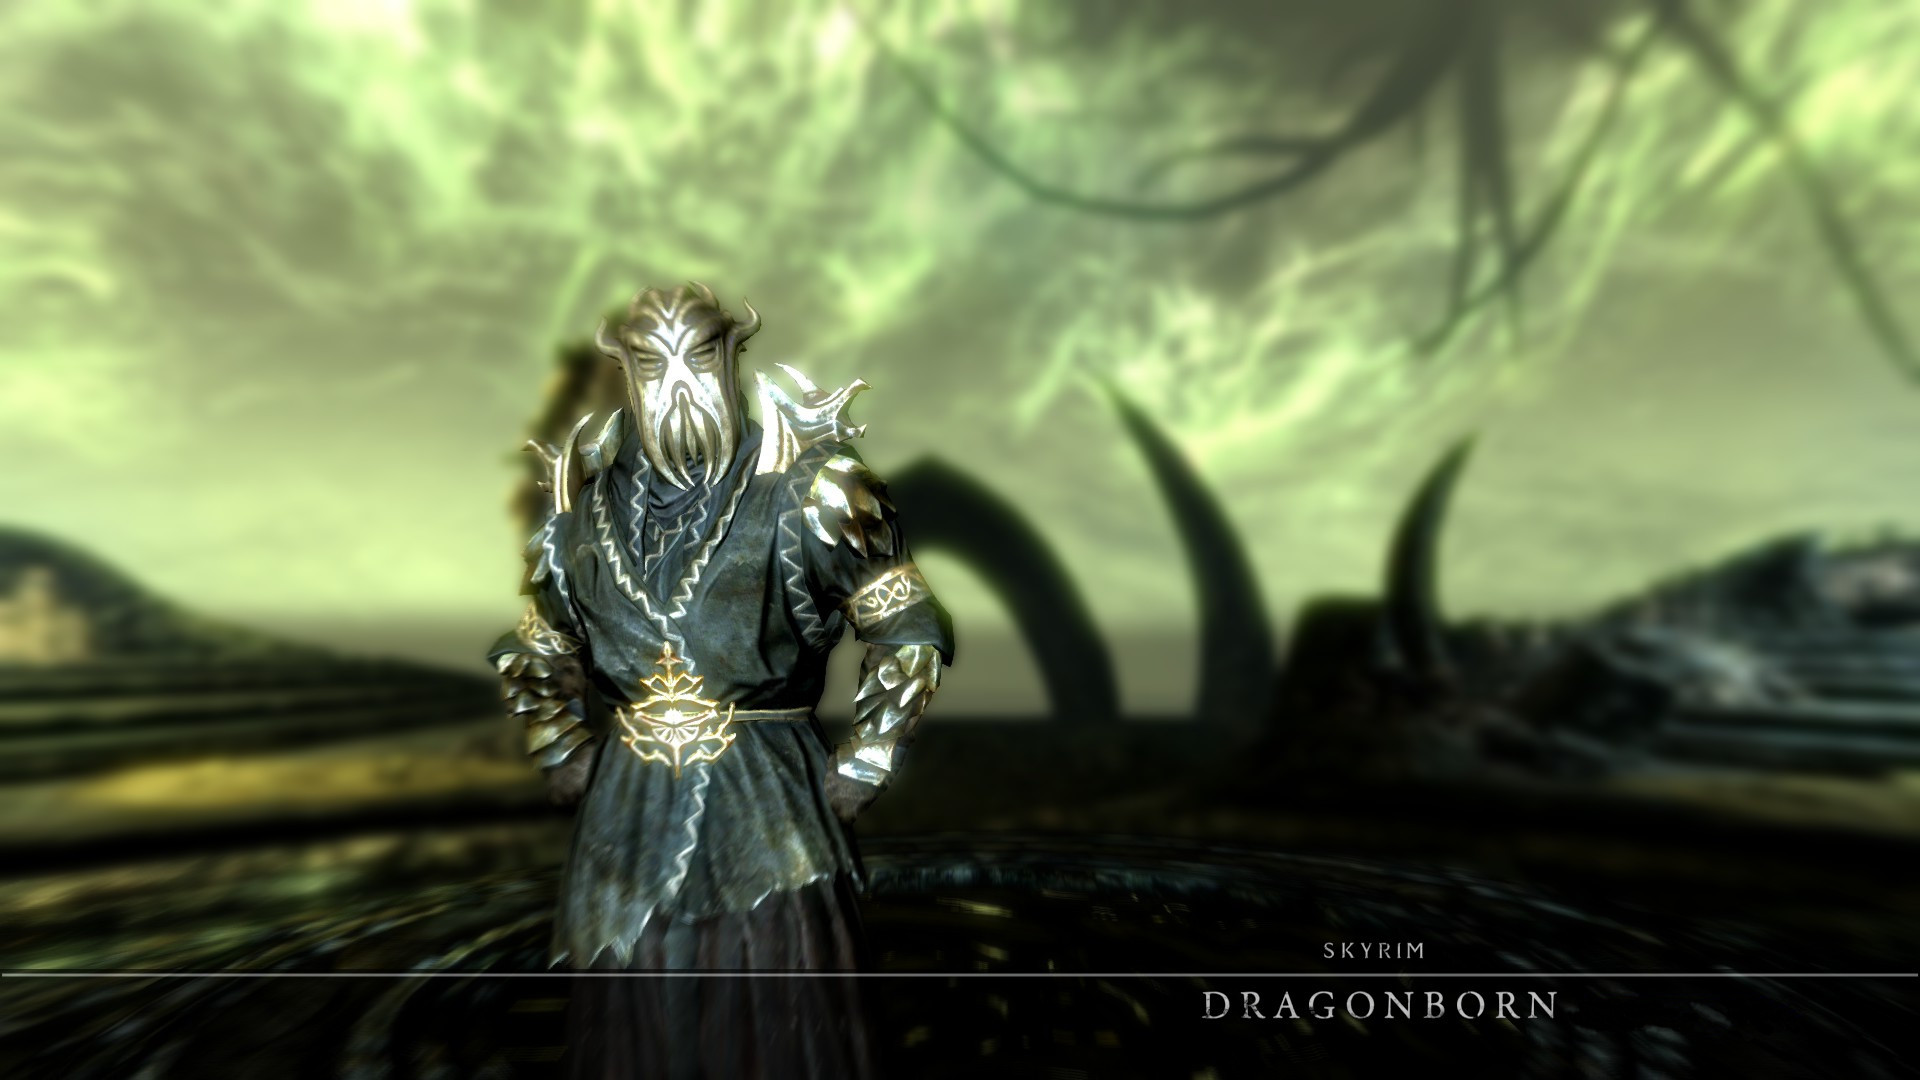 1920x1080 I tried my hand at making a wallpaper for the most recent DLC, Dragonborn.